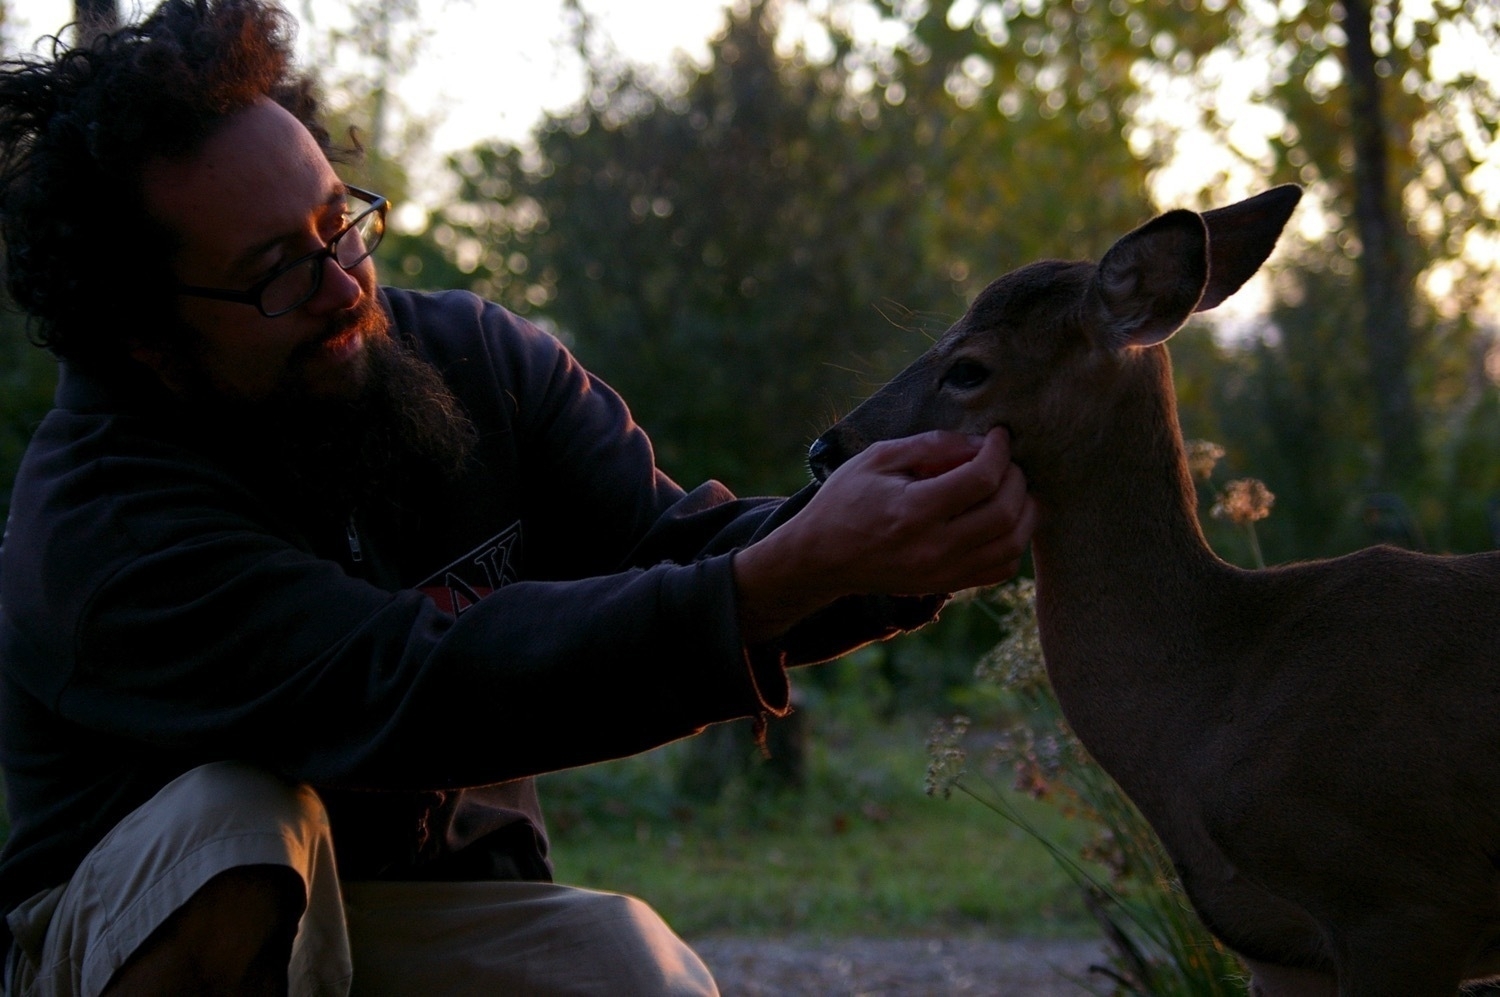 A Beardy guy with glasses looking at a small deer as he reaches out with both hands, scratching the deer's cheeks and neck 